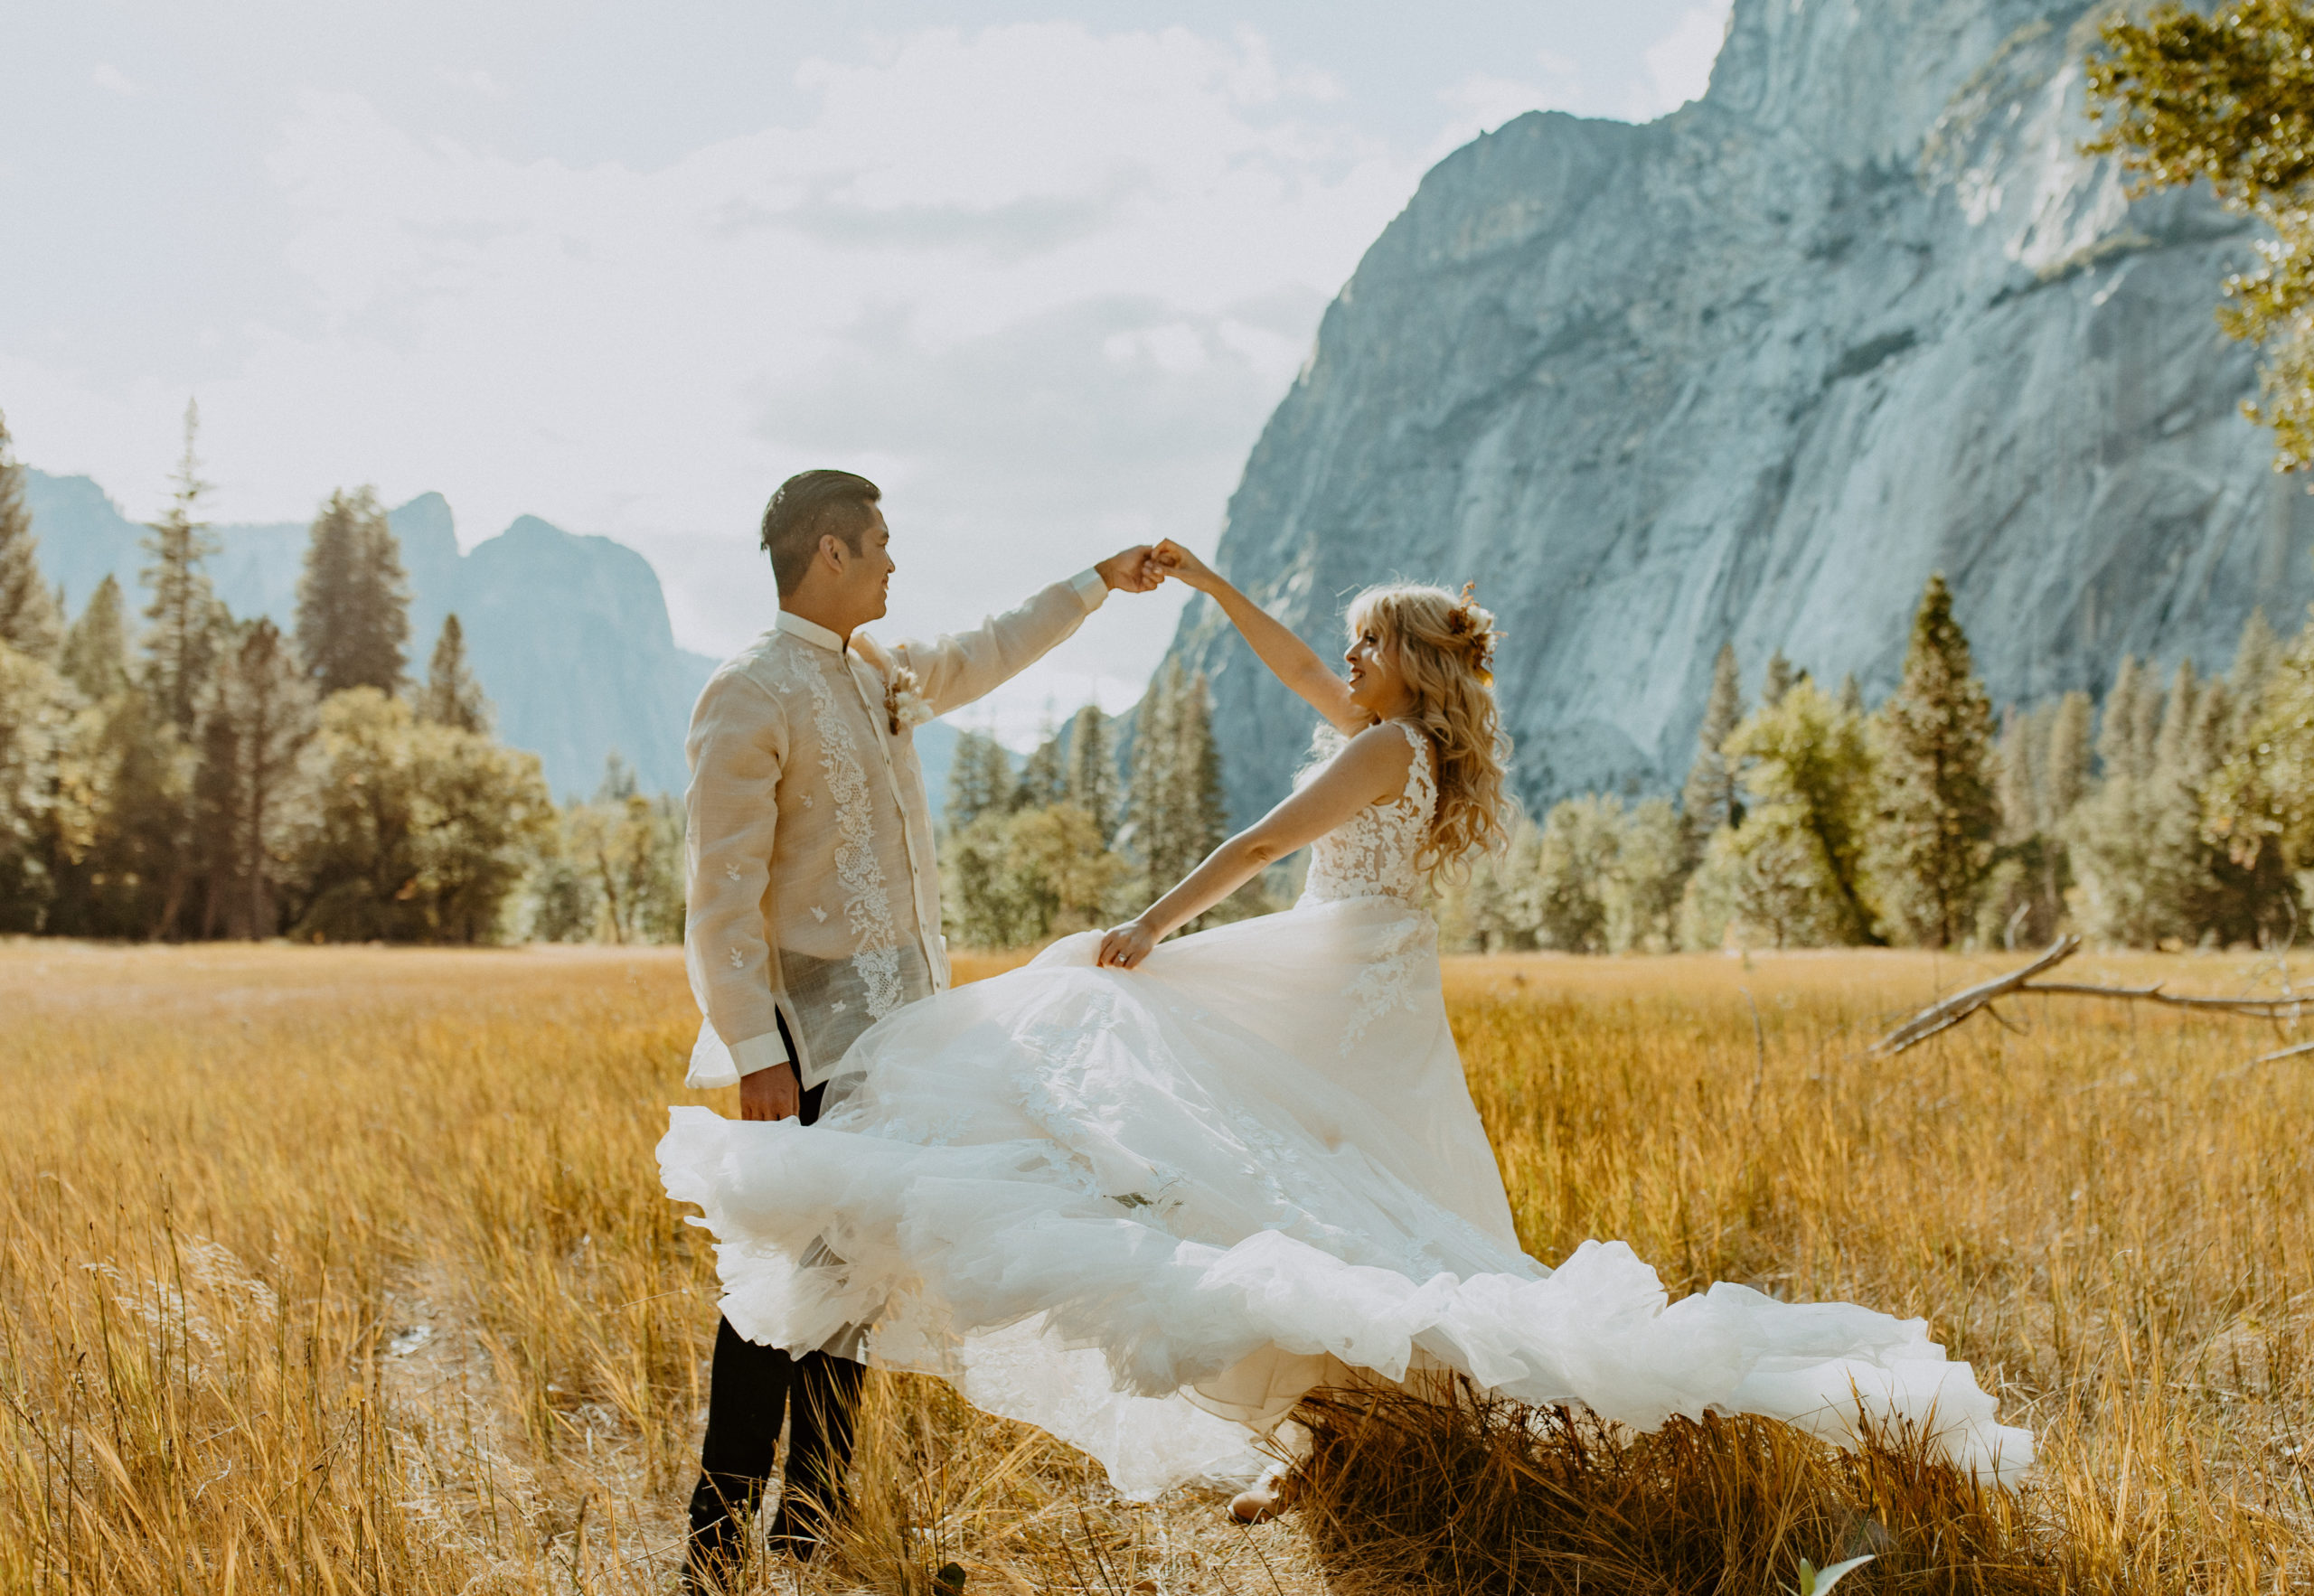 the couple twirling in Yosemite Valley